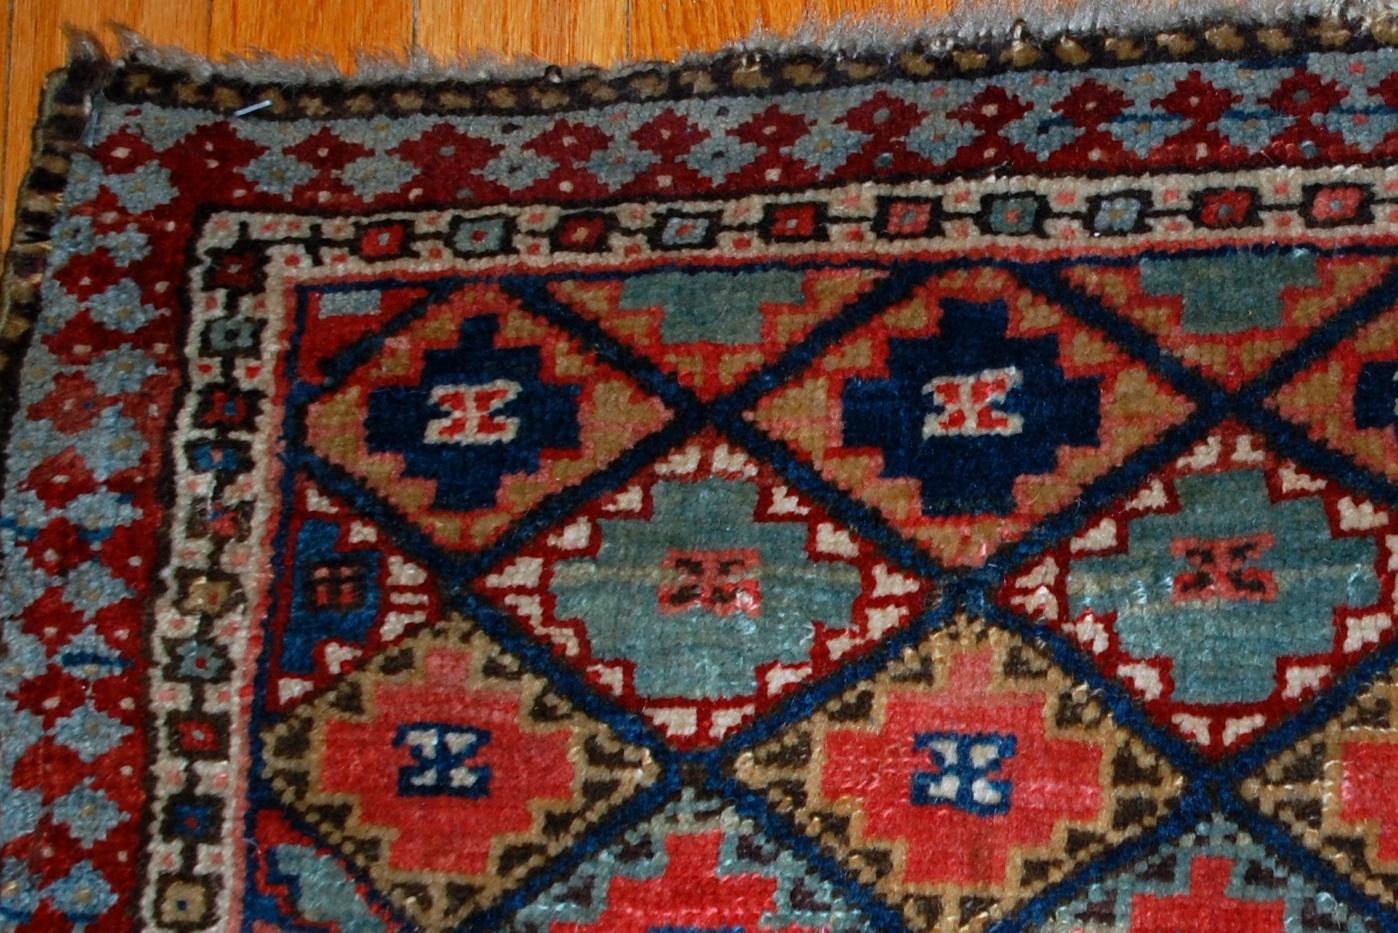 Handmade antique collectible Kurdish bag face in geometric design with colorful background and geometric design . Very interesting border sky blue border with burgundy accent on it. The bag face is in original good condition.

-condition: original